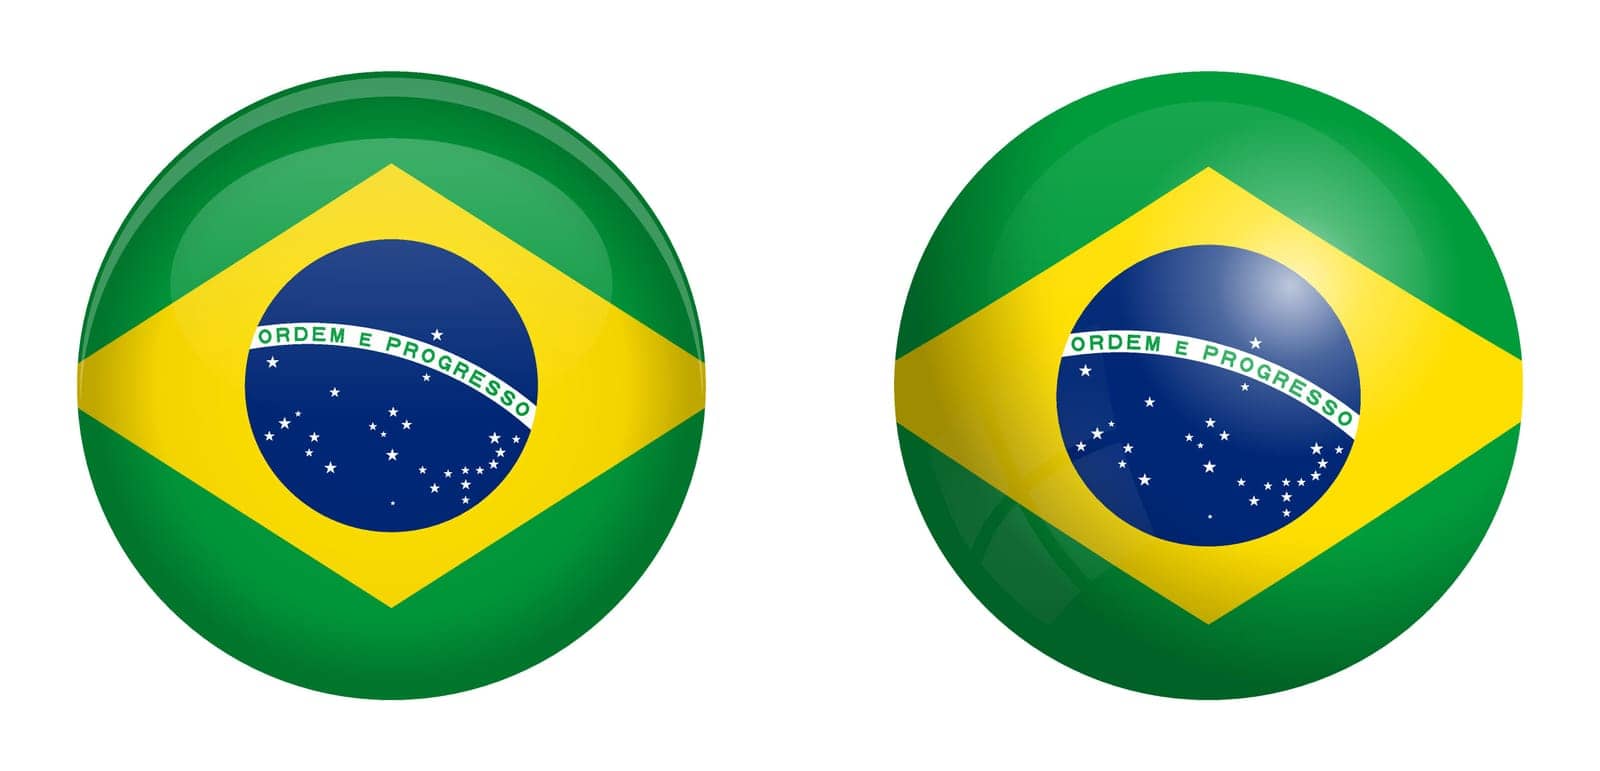 Brazilian flag under 3d dome button and on glossy sphere / ball.